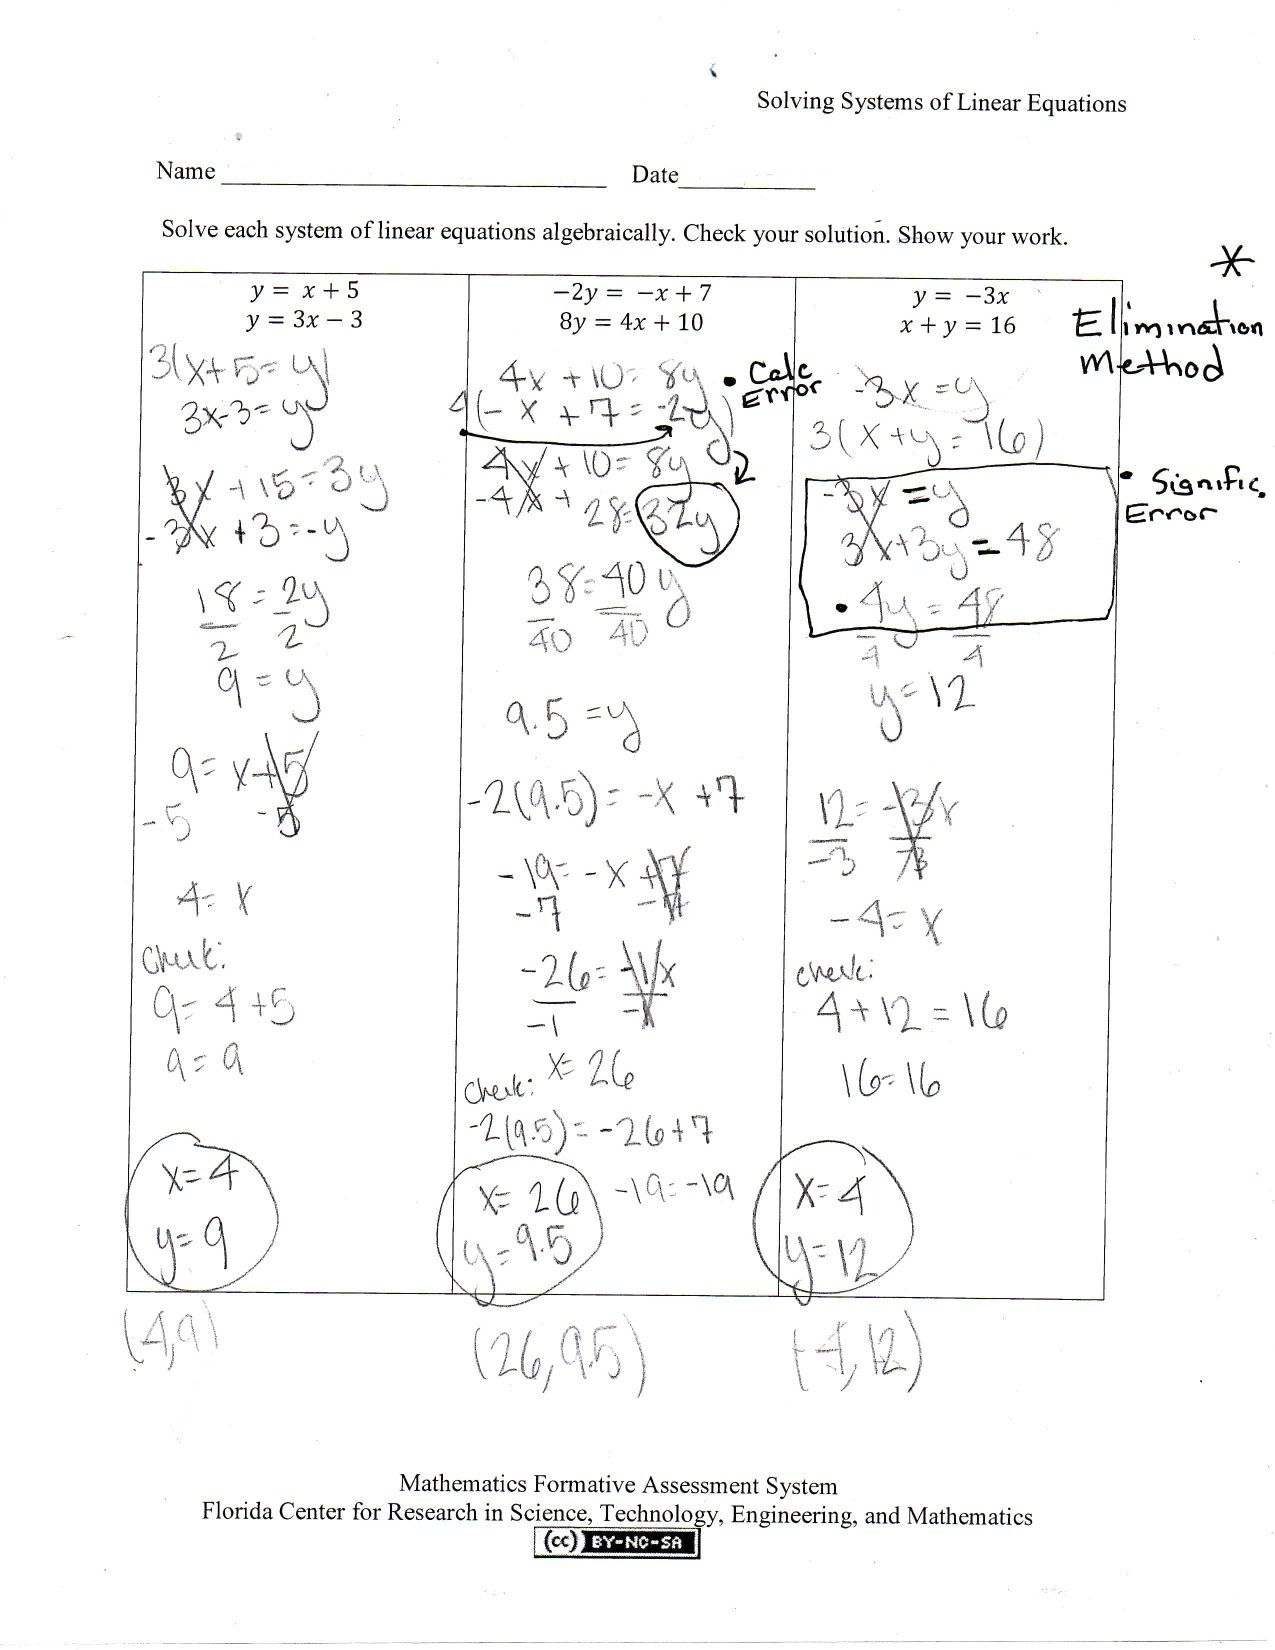 Solving Systems Of Linear Equations Students Are Asked To Solve For Solving Systems Of Equations Algebraically Worksheet